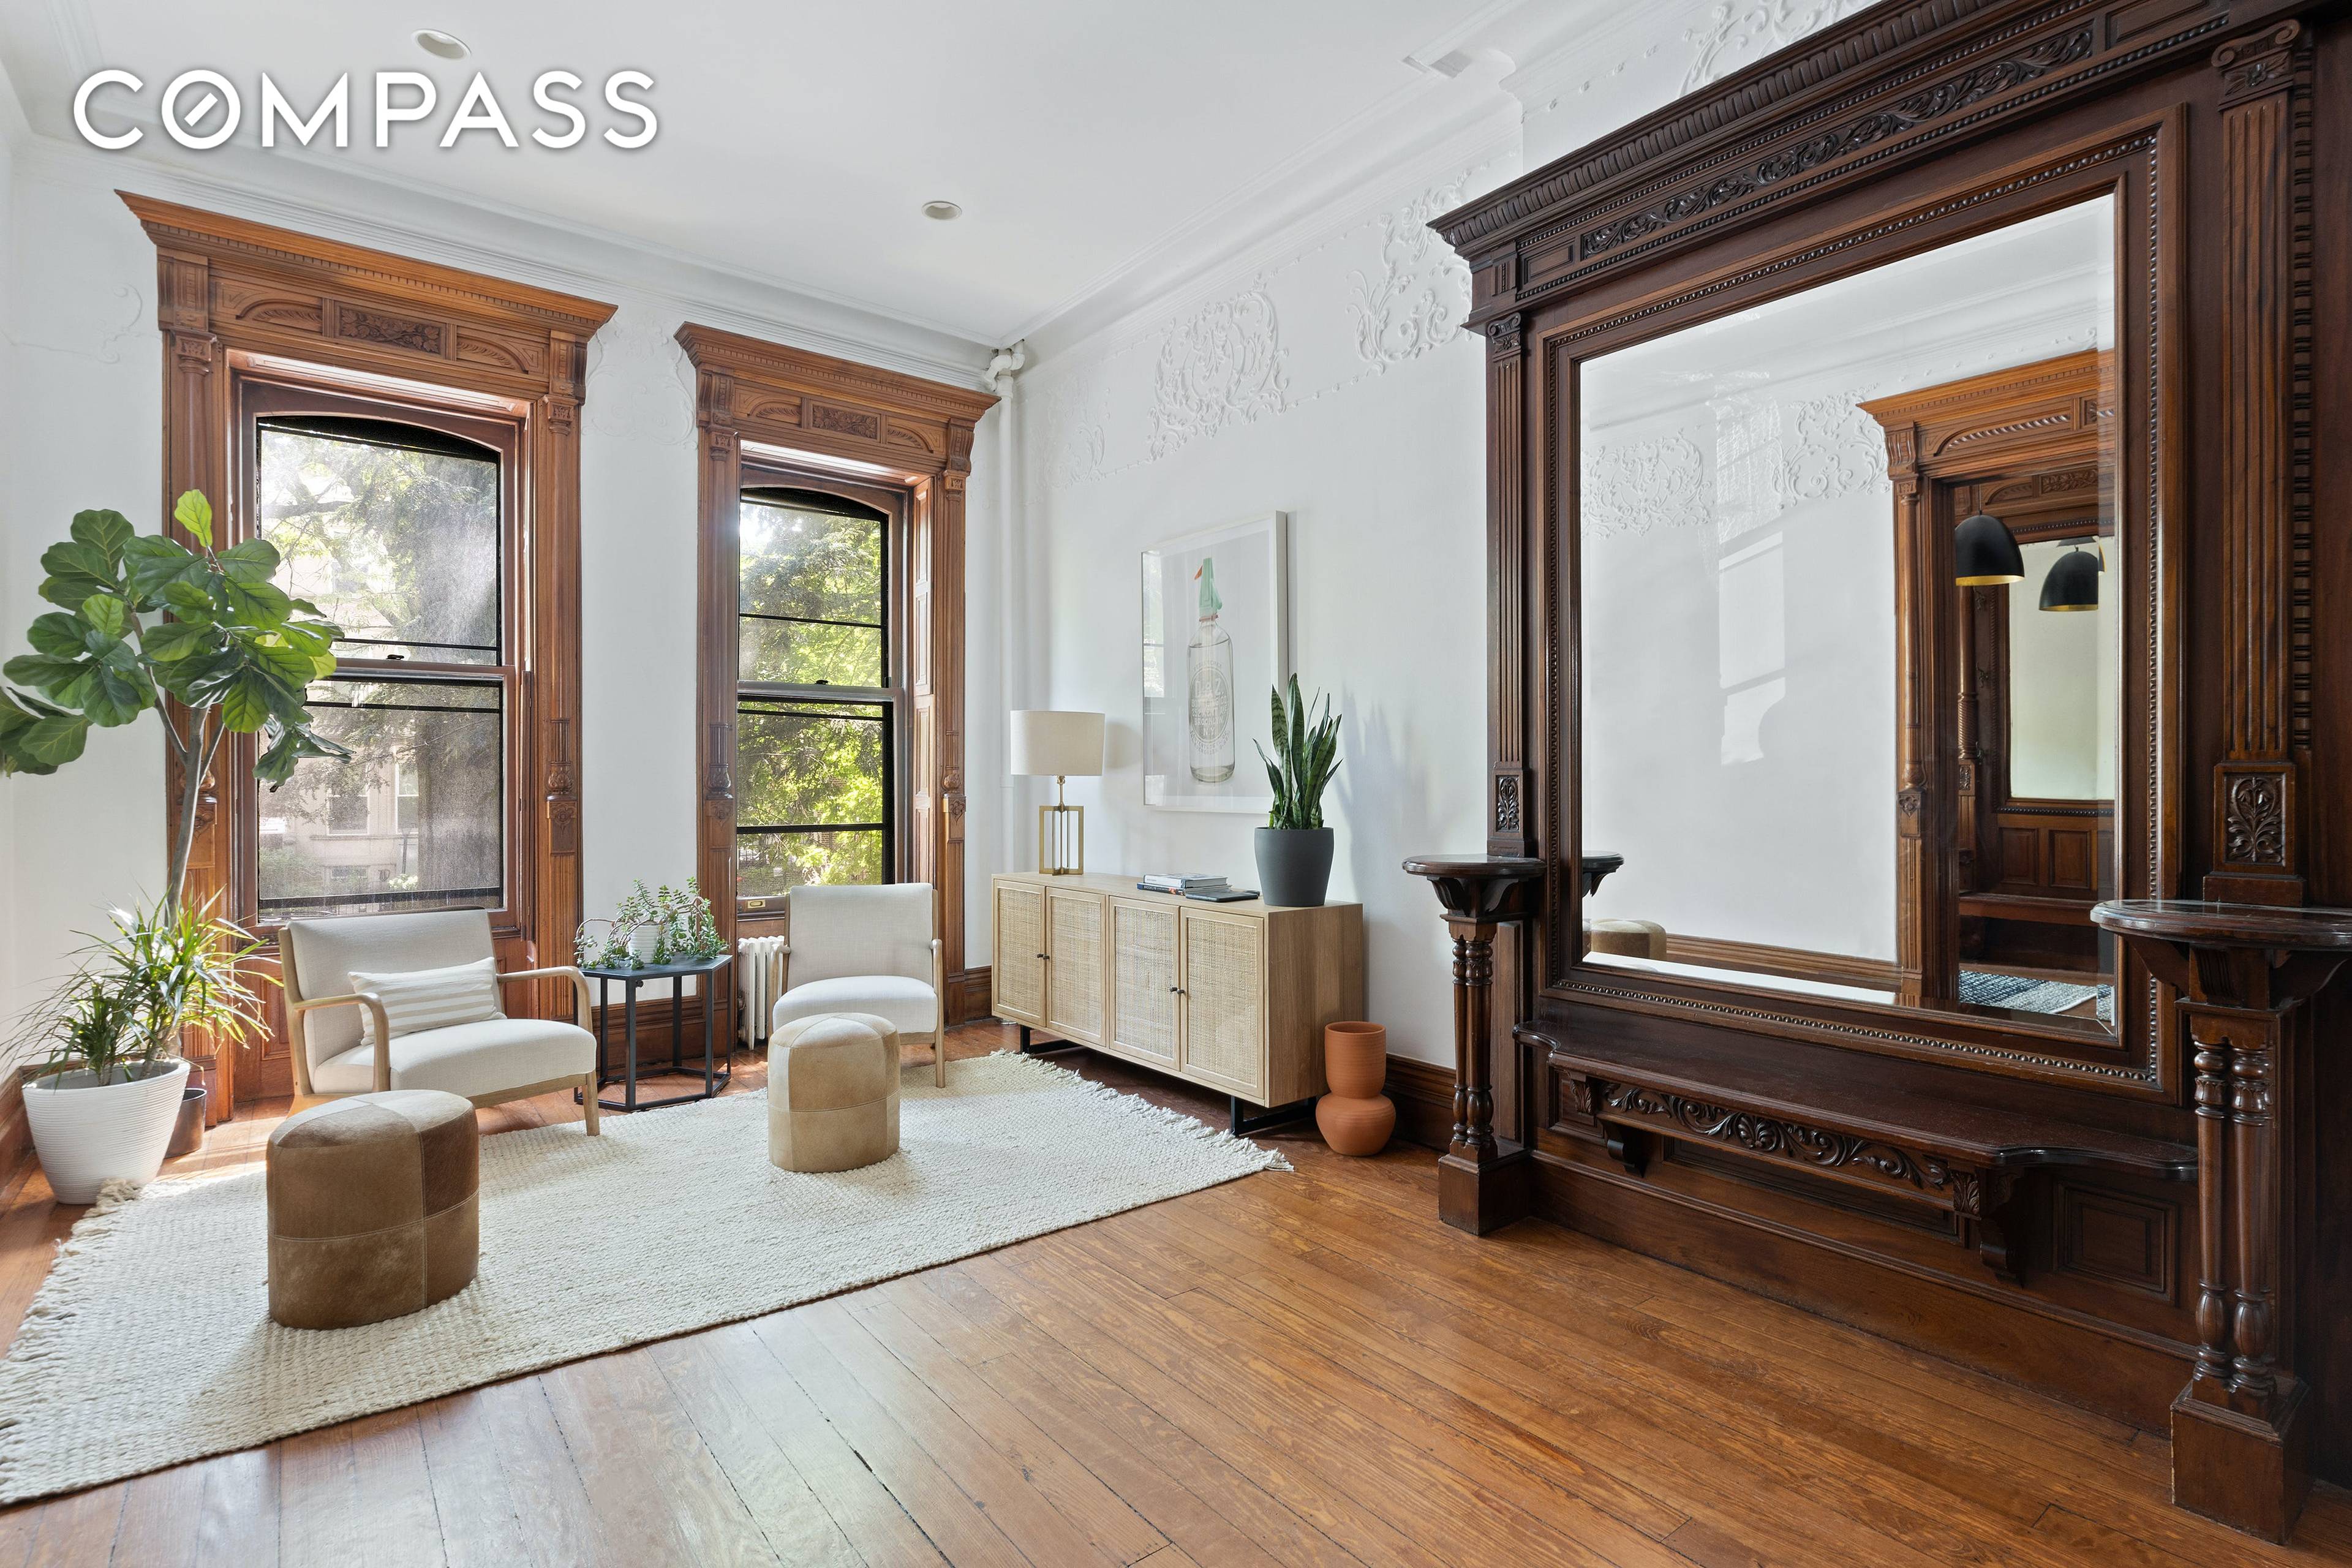 523 3rd Street is the quintessential Park Slope brownstone.